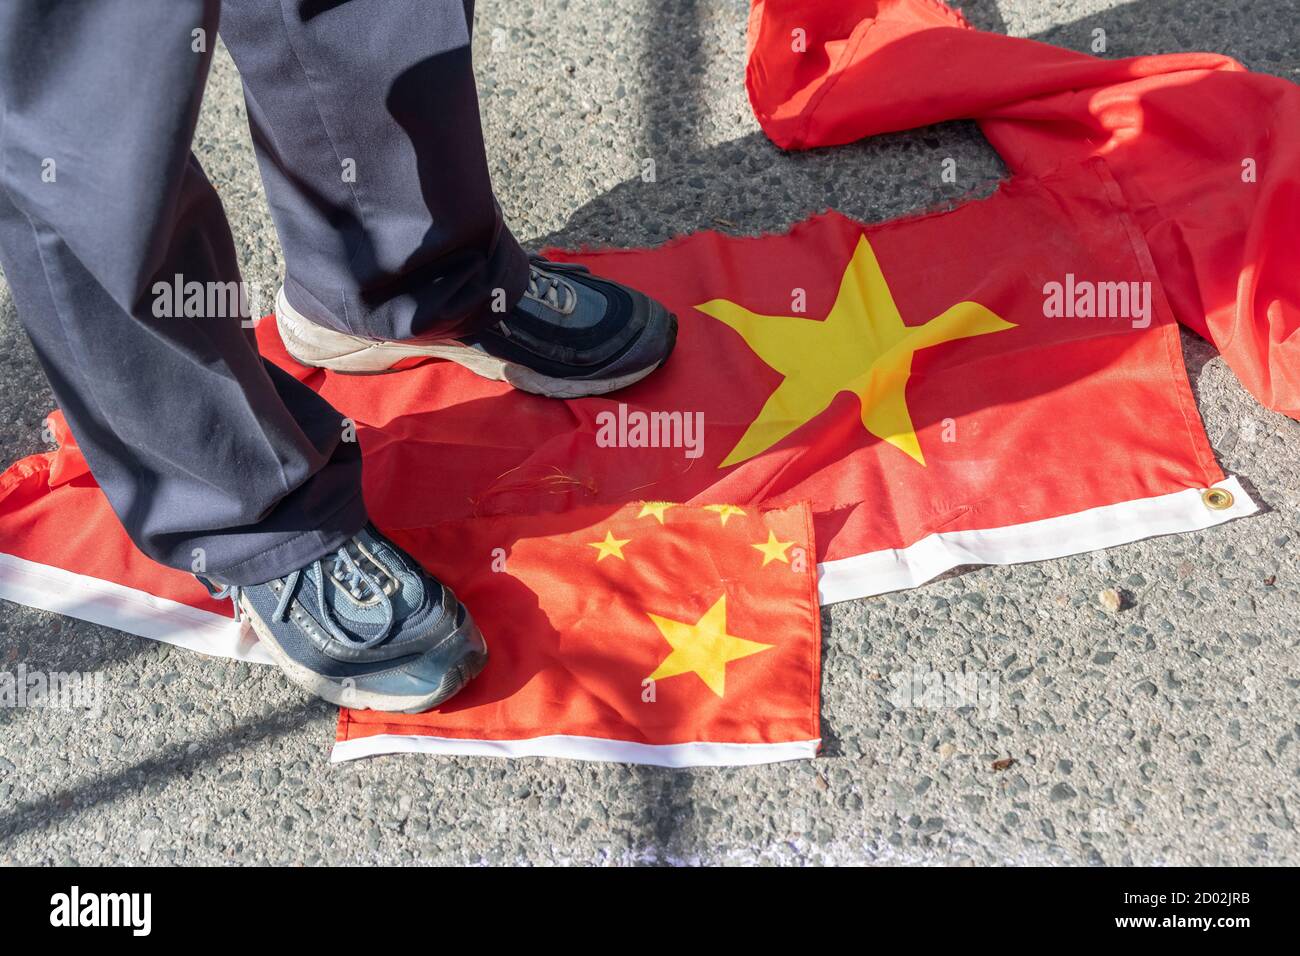 A man from Hong Kong steps on ripped-up Chinese flags at a protest against the communist government on the 71st anniversary of the communist nation. Stock Photo